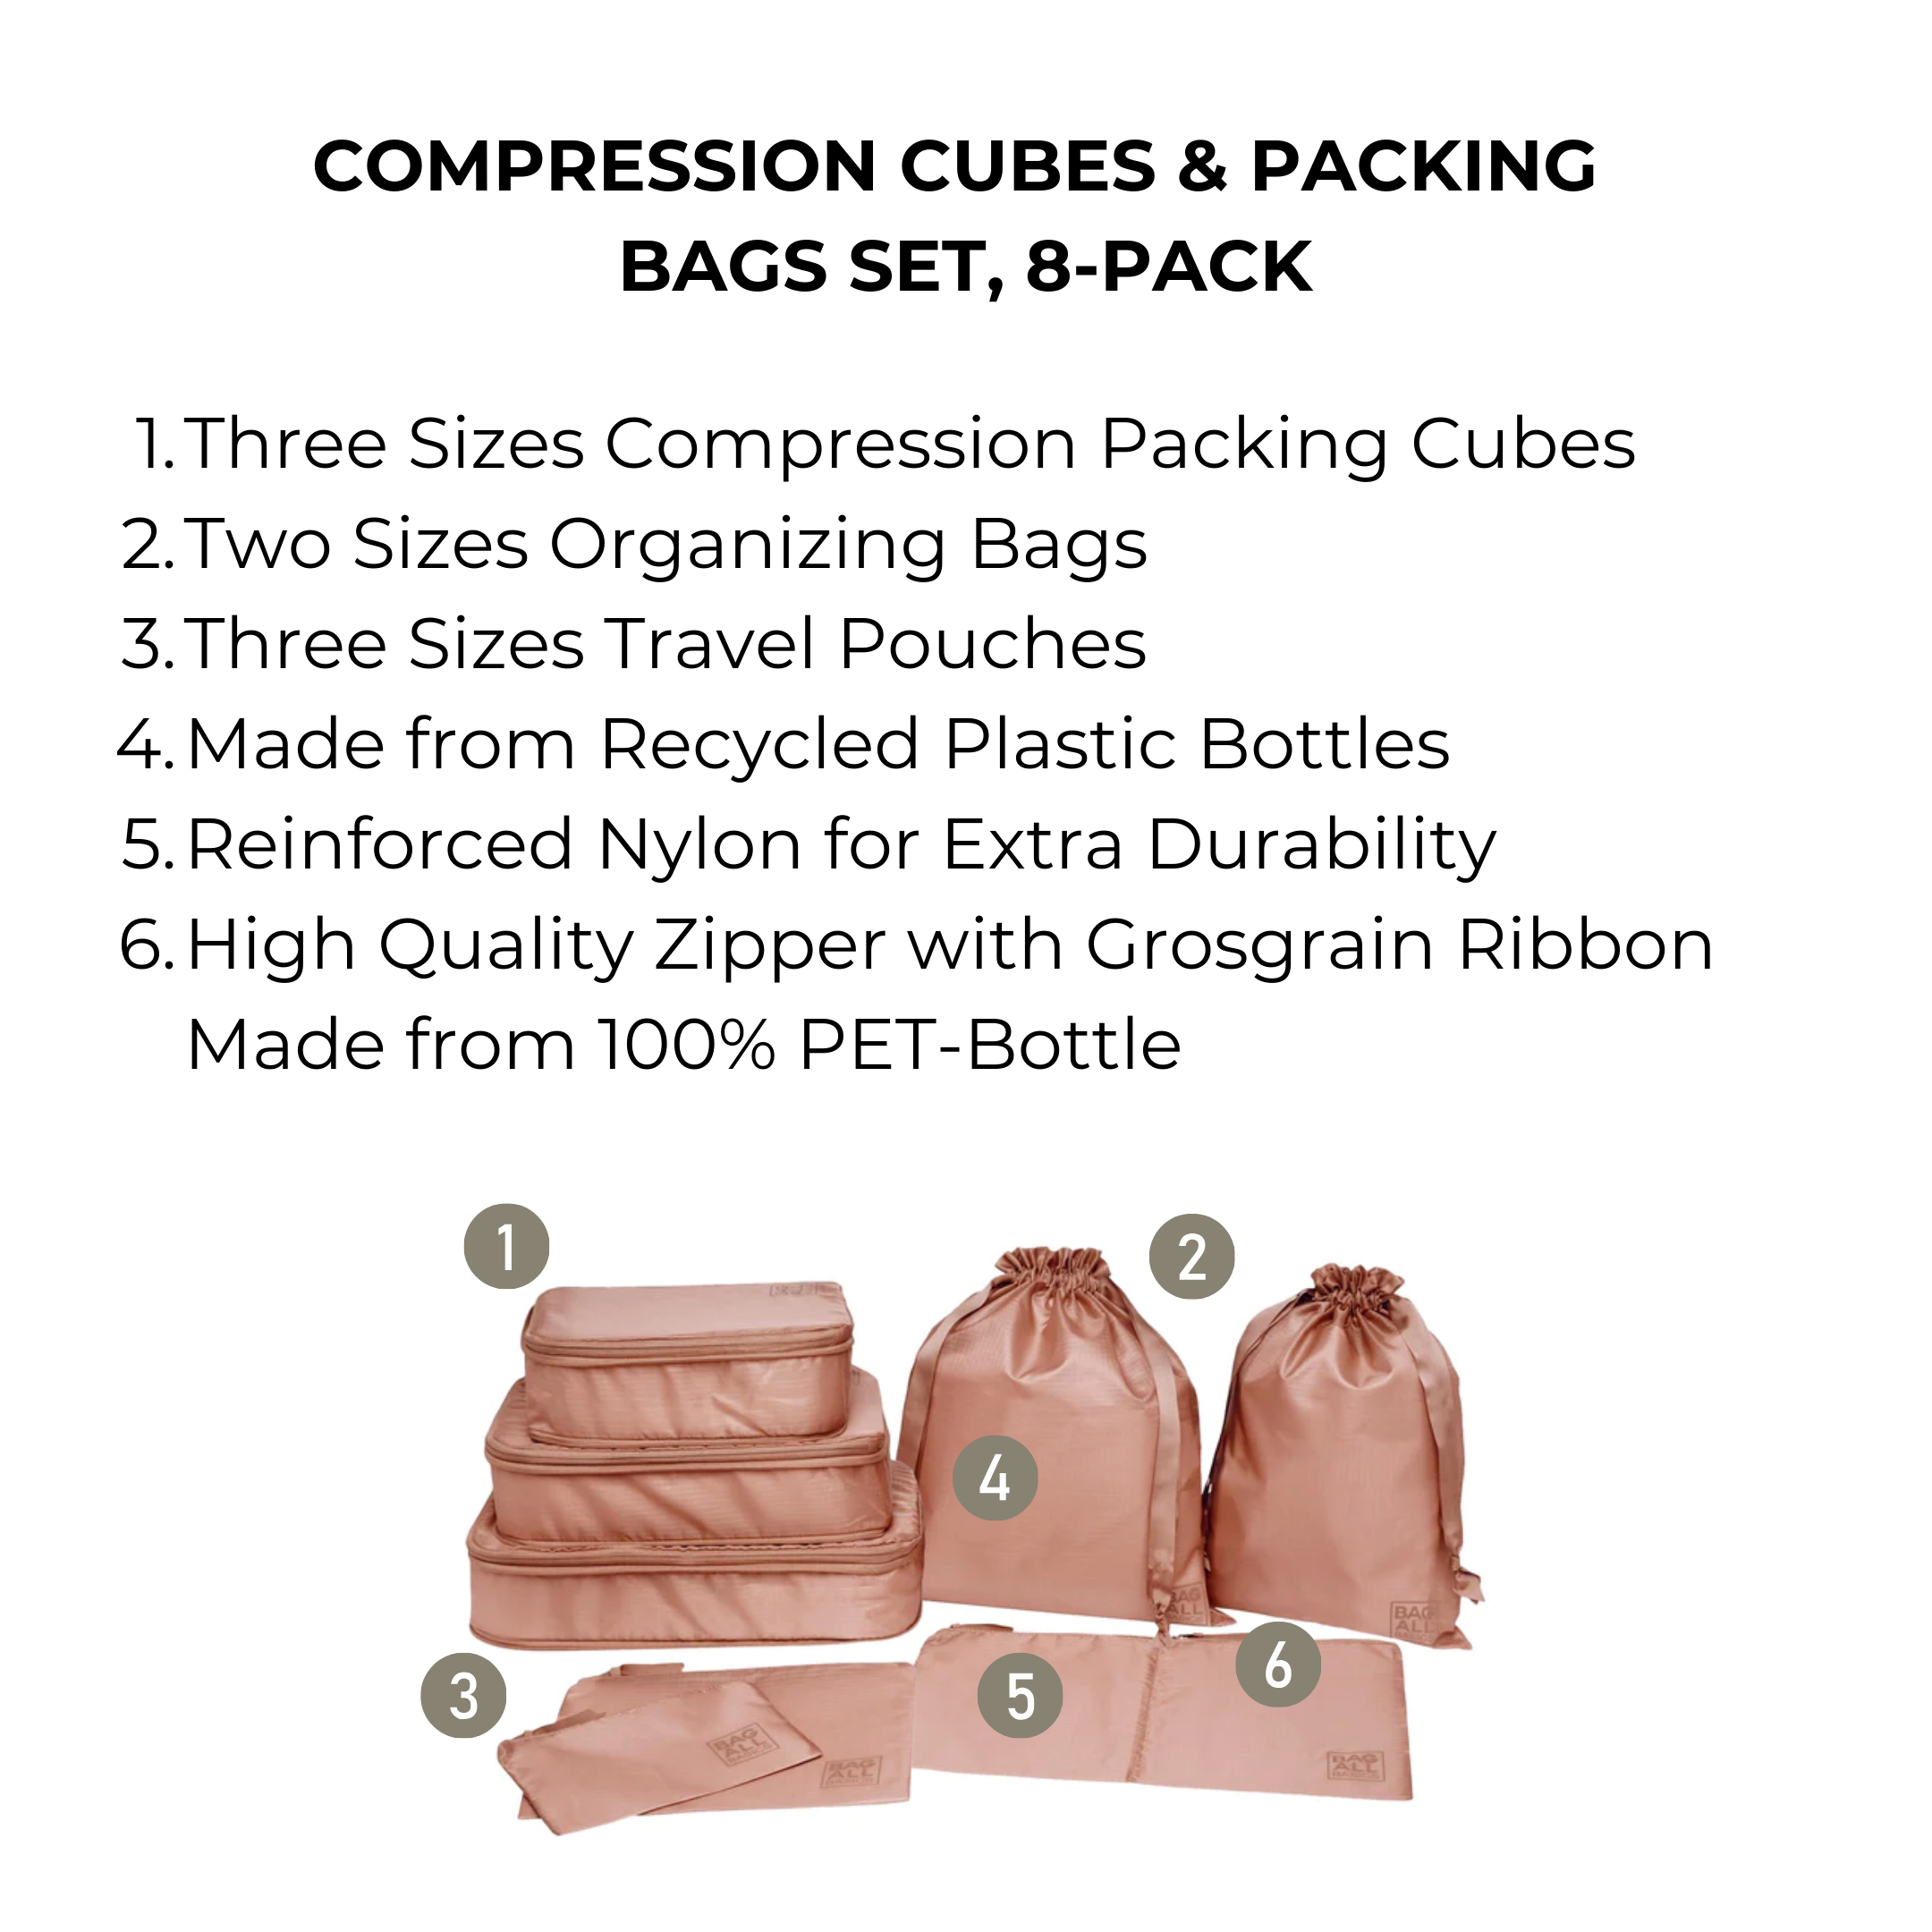 Compression Cubes & Packing Bags Set, 8-pack, Pink/Blush | Bag-all